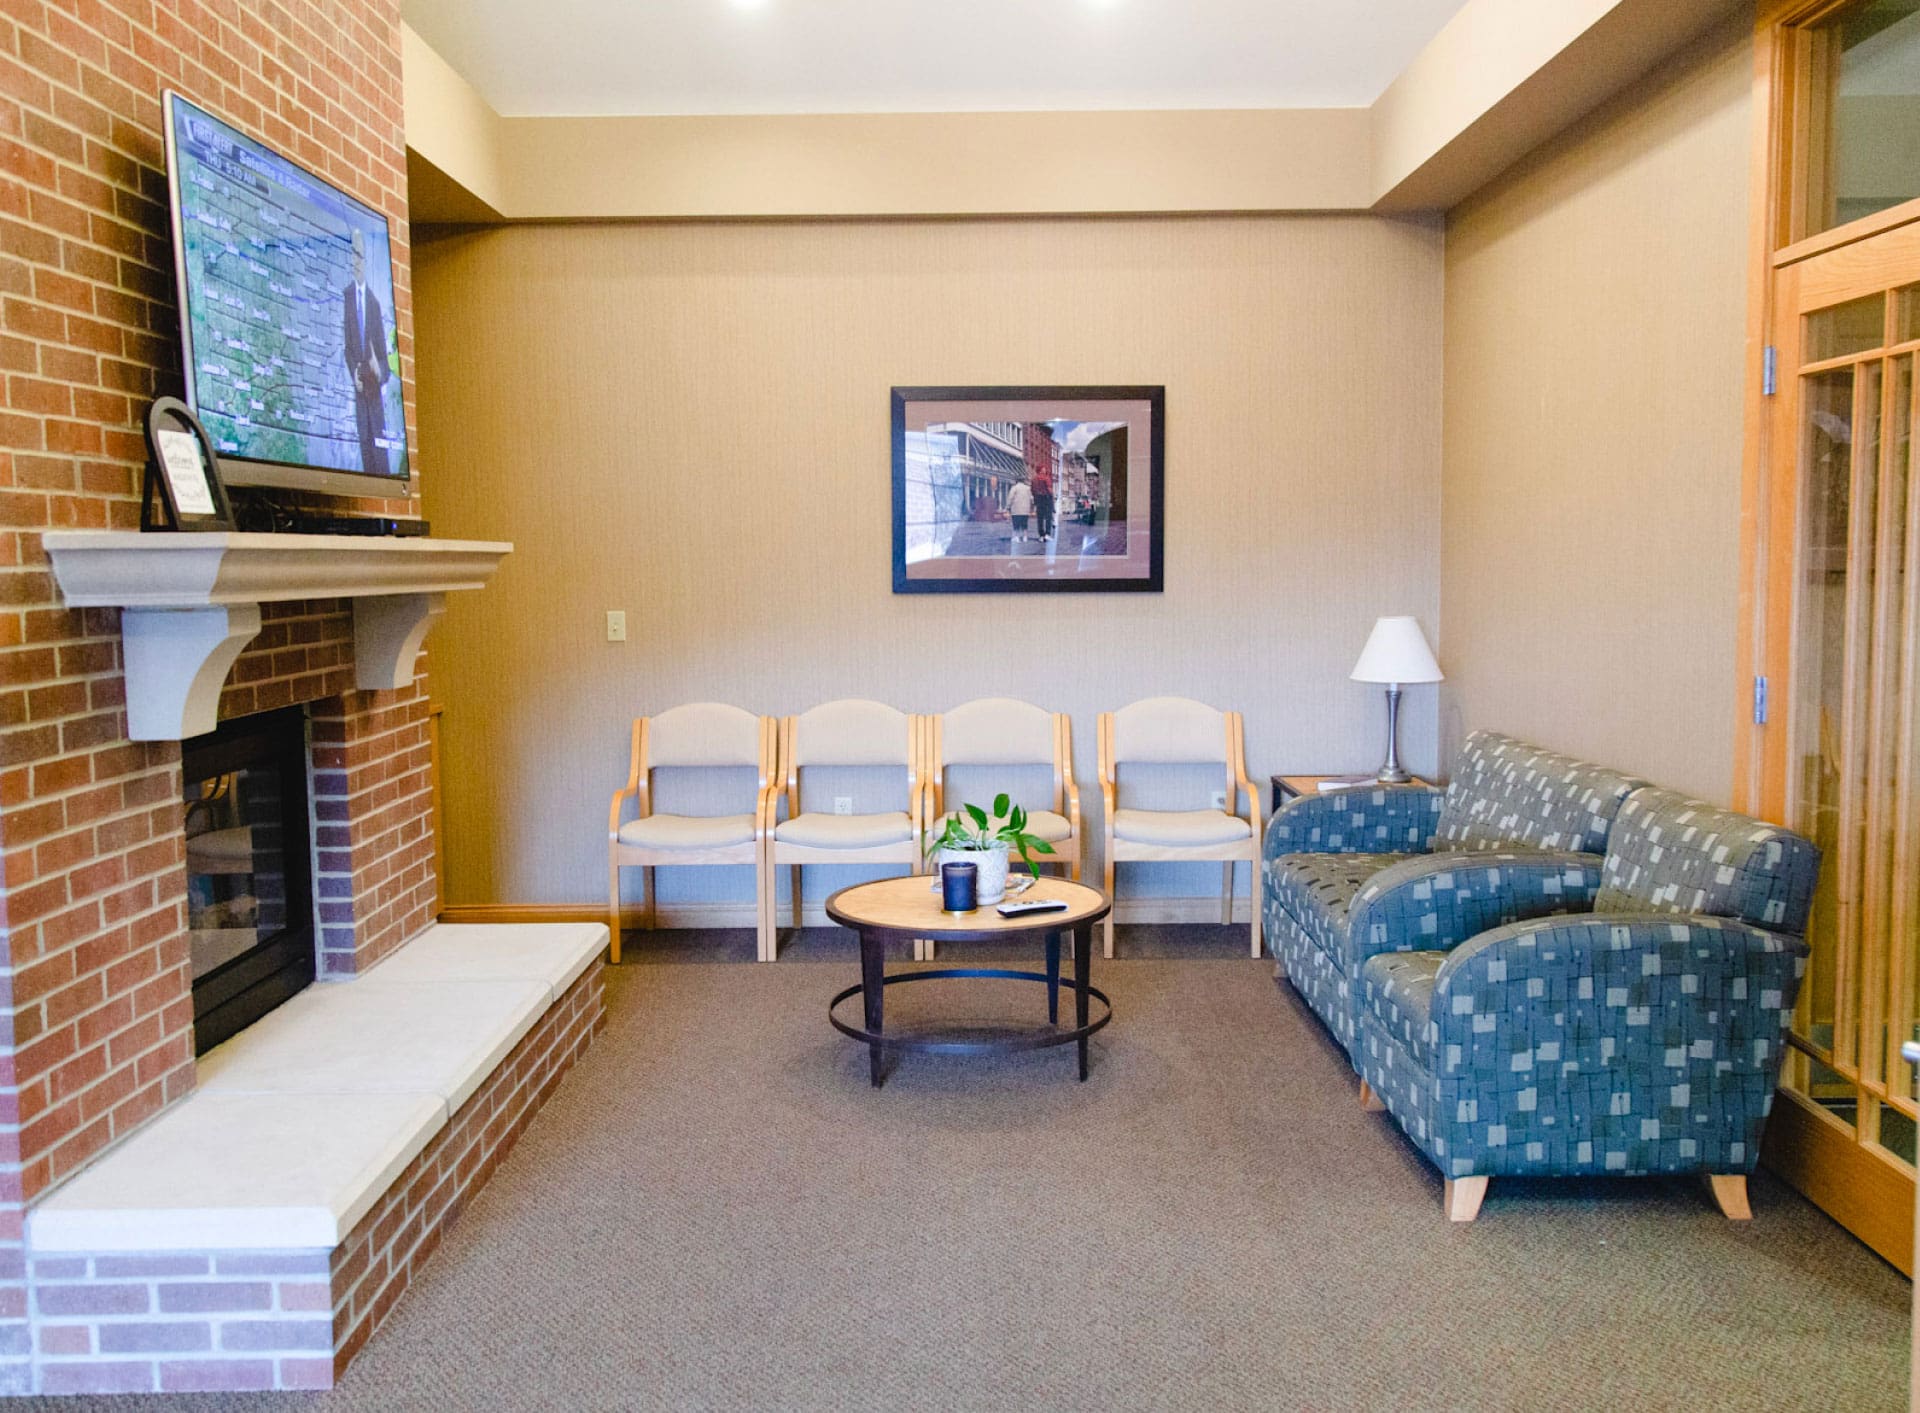 reception area with brick fireplace on left side, beige chairs along back wall and blue chairs on right wall